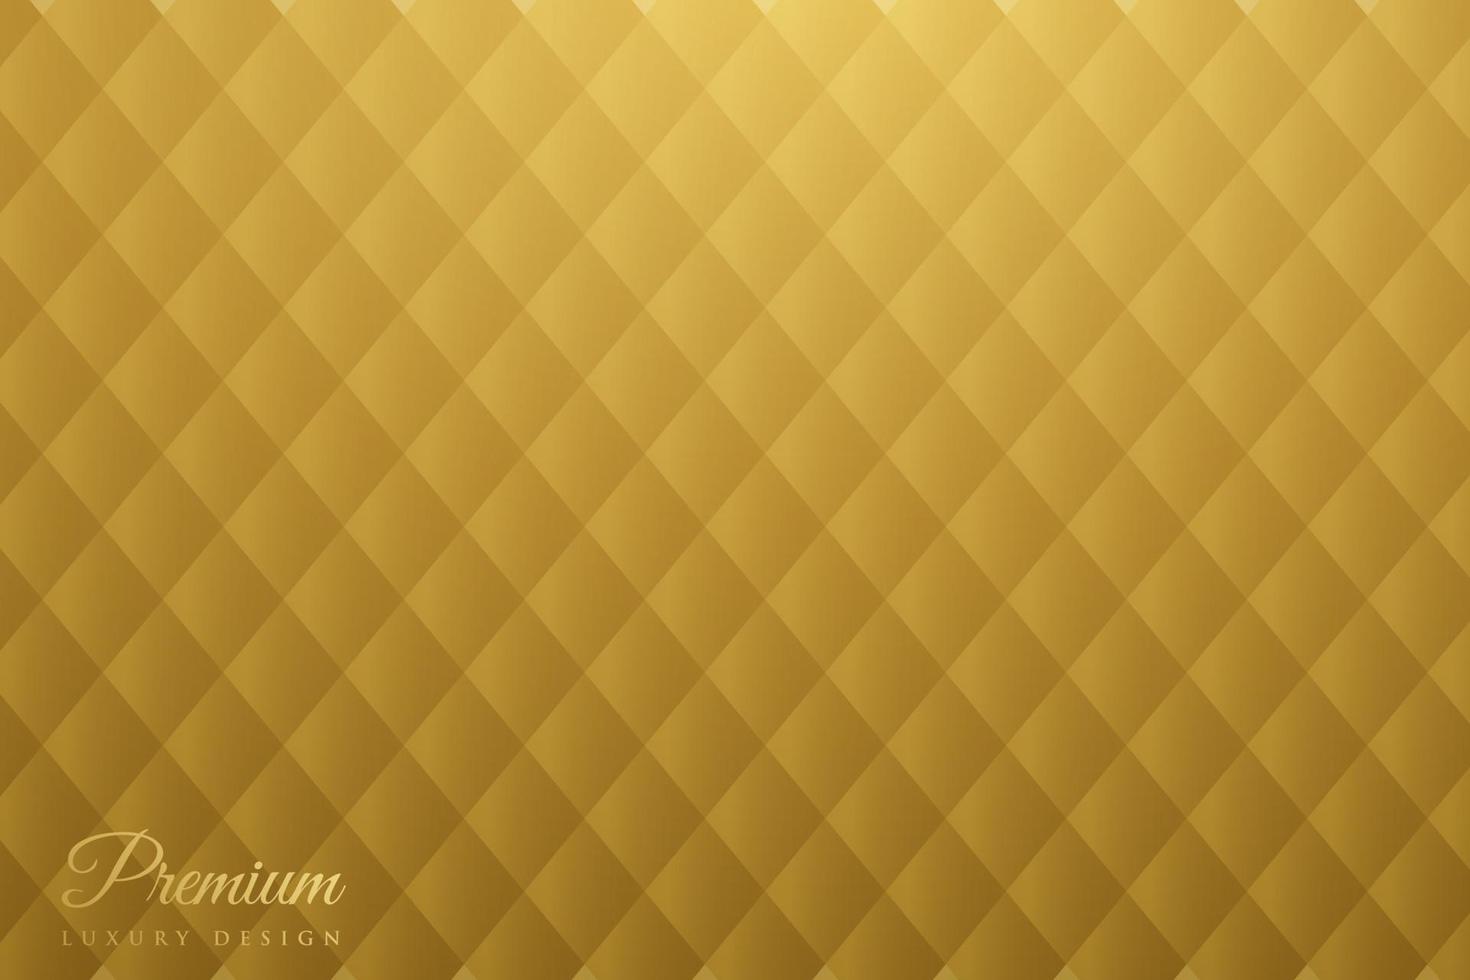 Beautiful gold abstract background with gold diamond abstract pattern Business design Shining background 3D luxury flat style Vector illustration of EPS 10